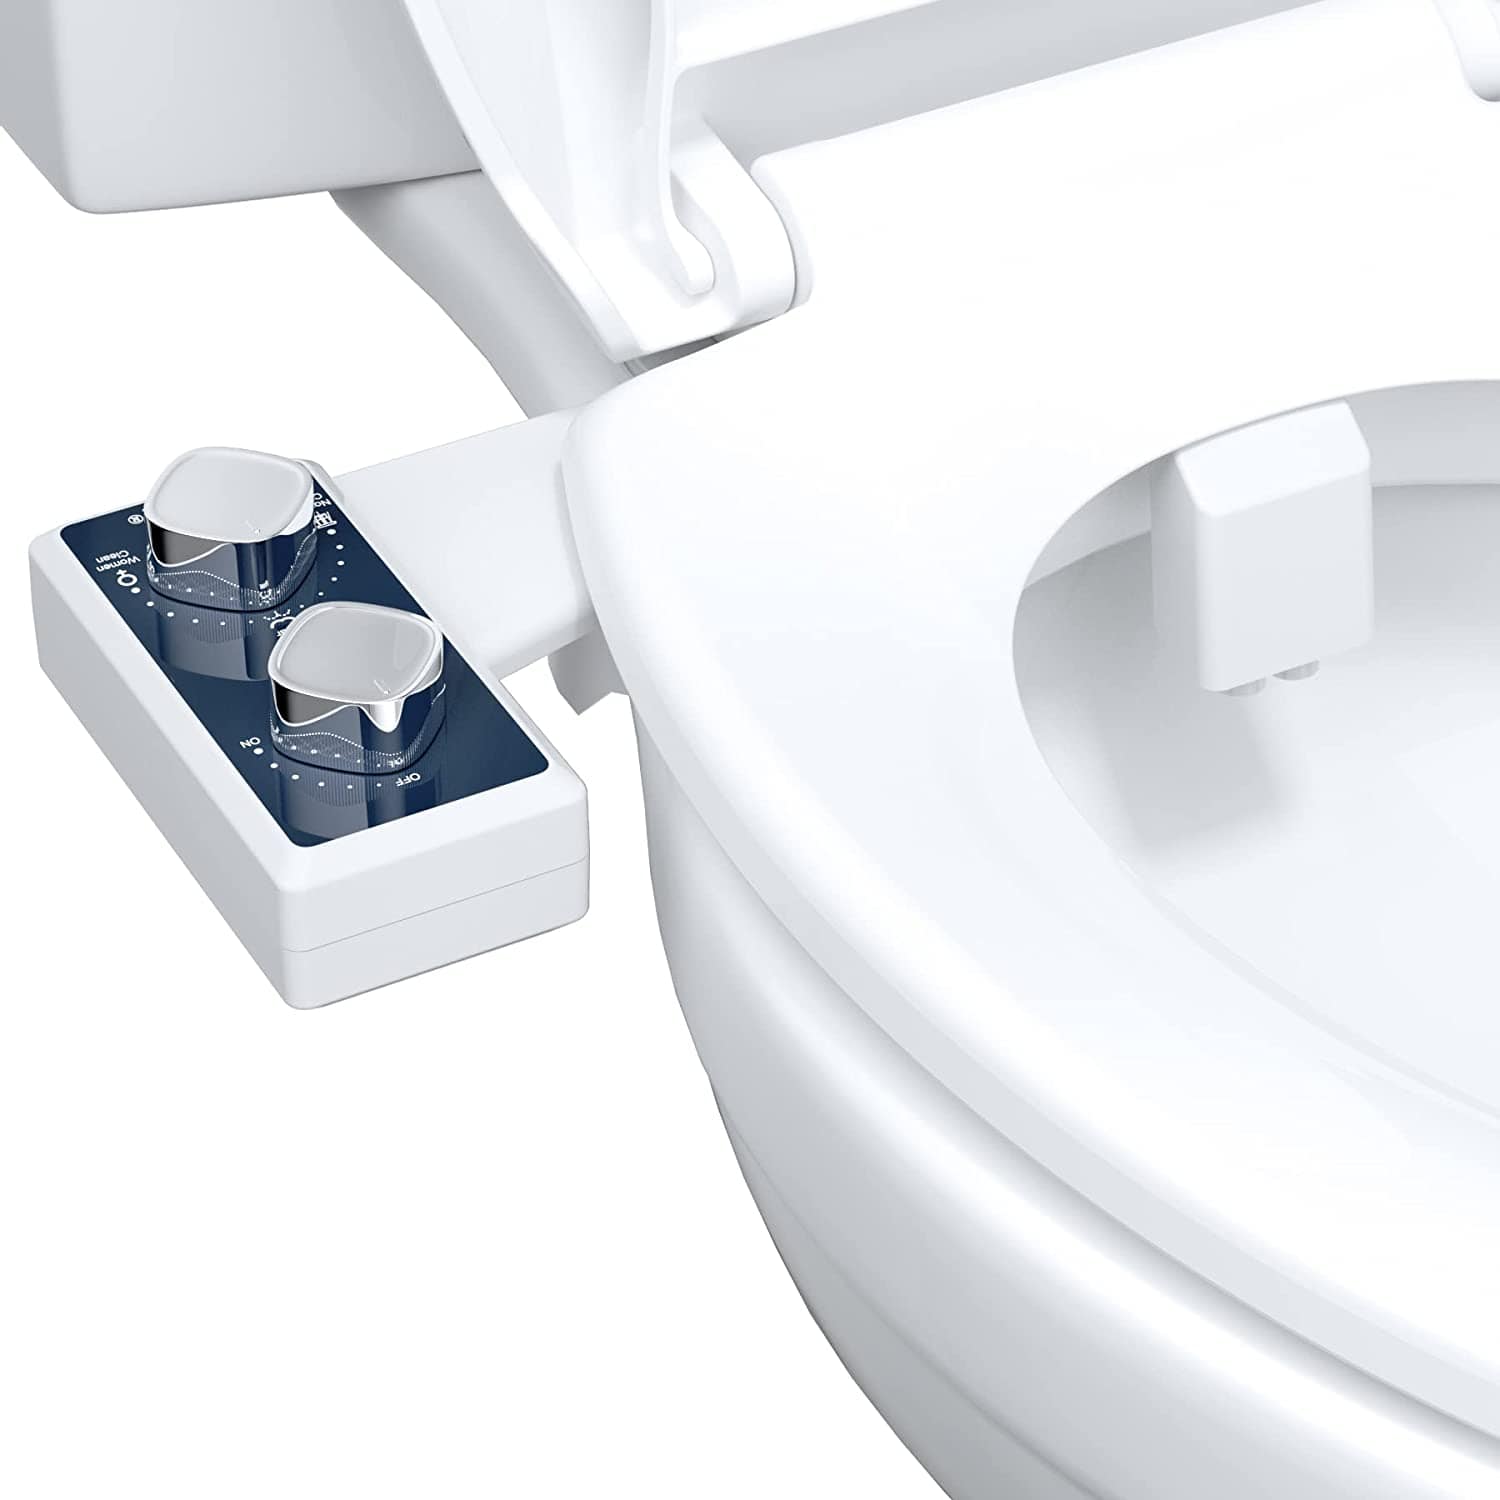 Hibbent Bidets Hibbent Attachable Bidet Non-Electric Bidet with Self-cleaning Dual Nozzle Cold Water - 2703